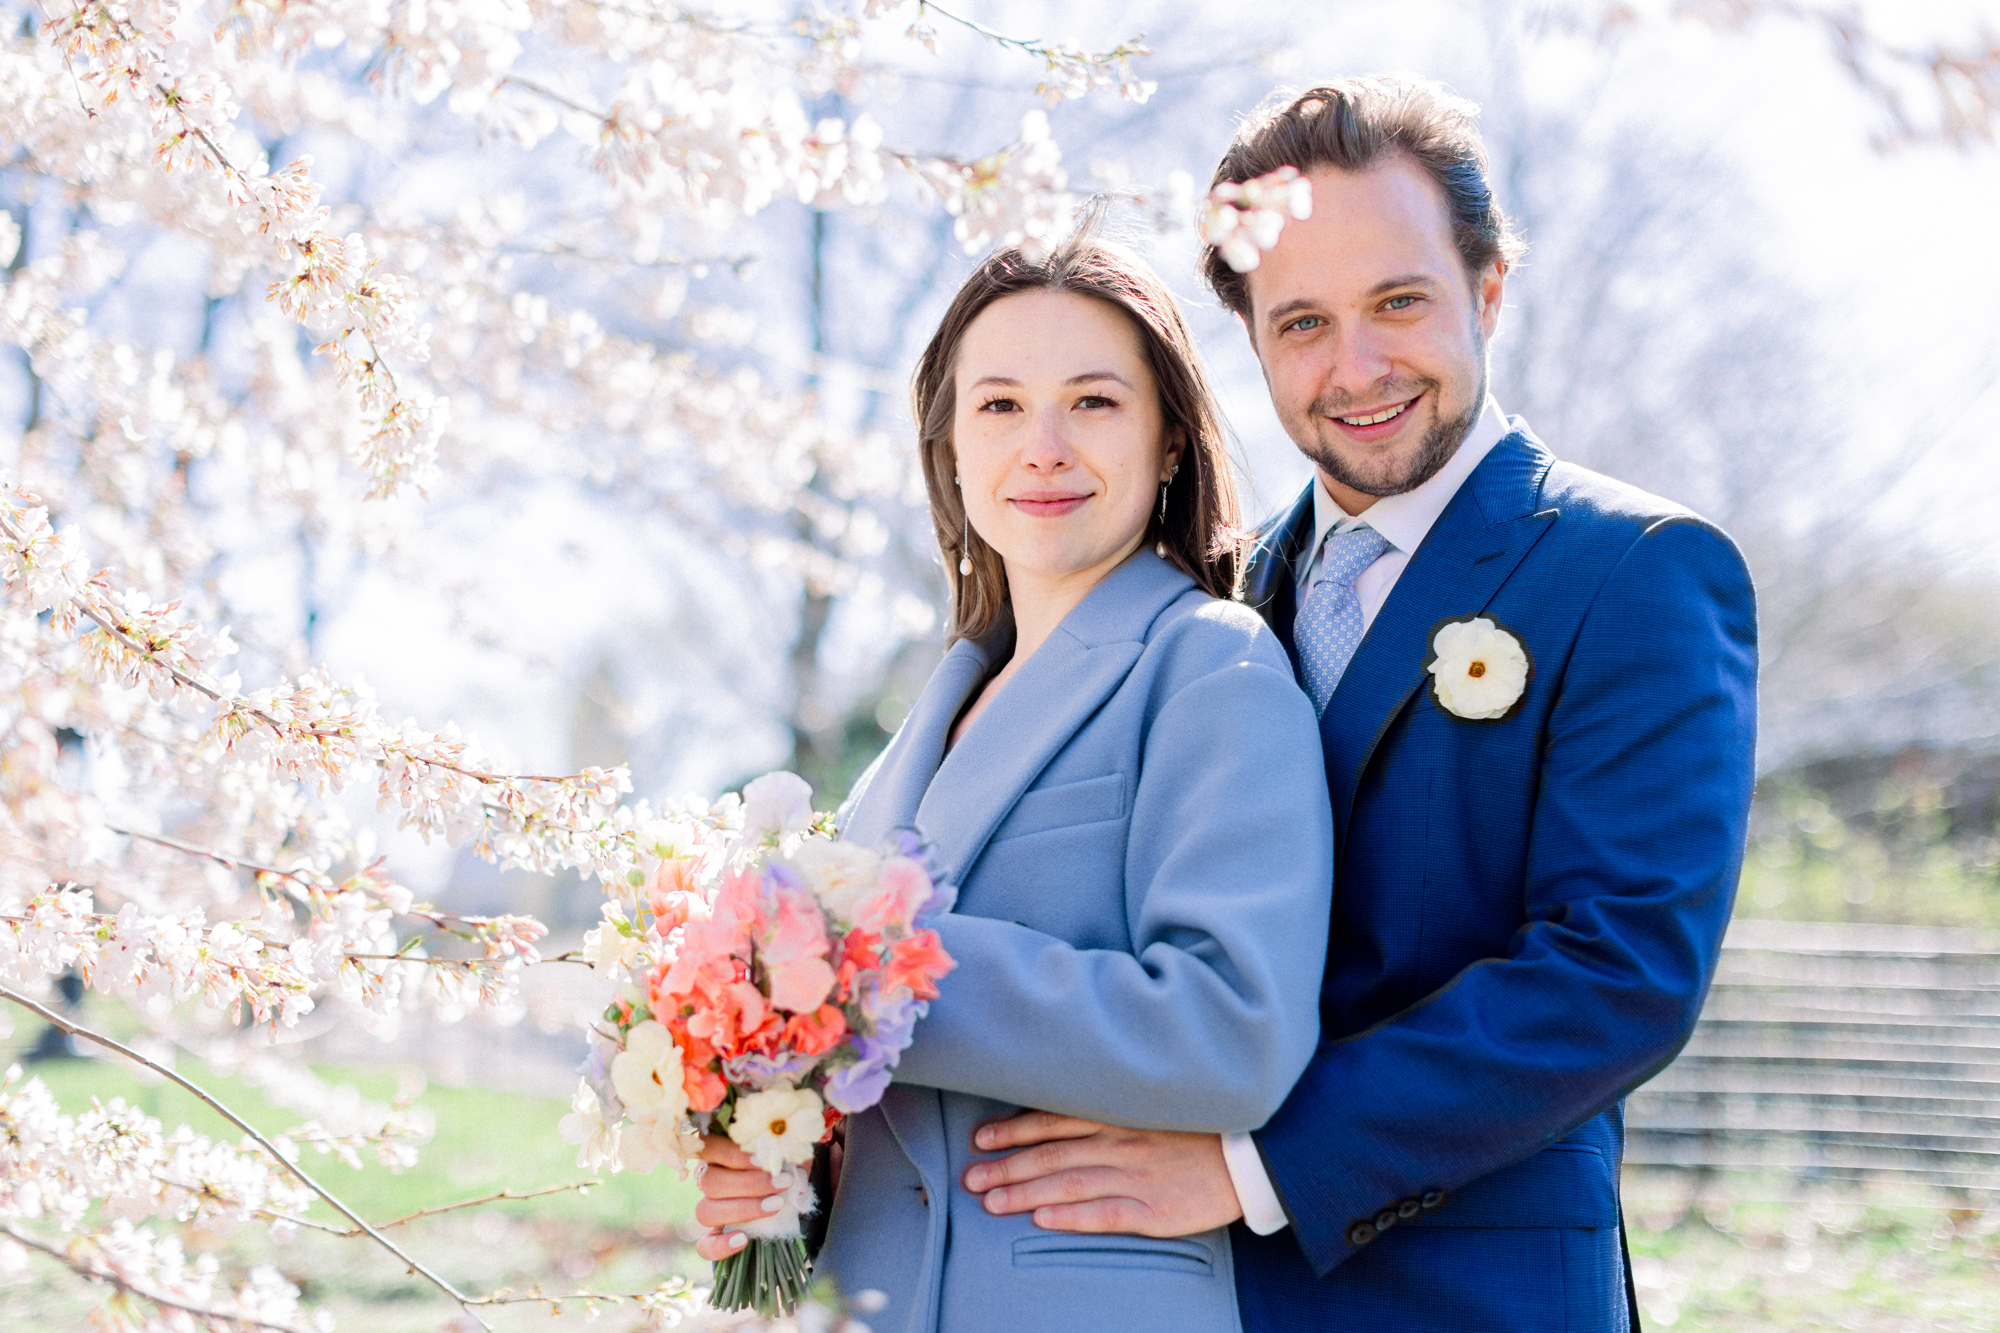 Inspiring Spring Bow Bridge Wedding in Central Park Among the Cherry Blossoms